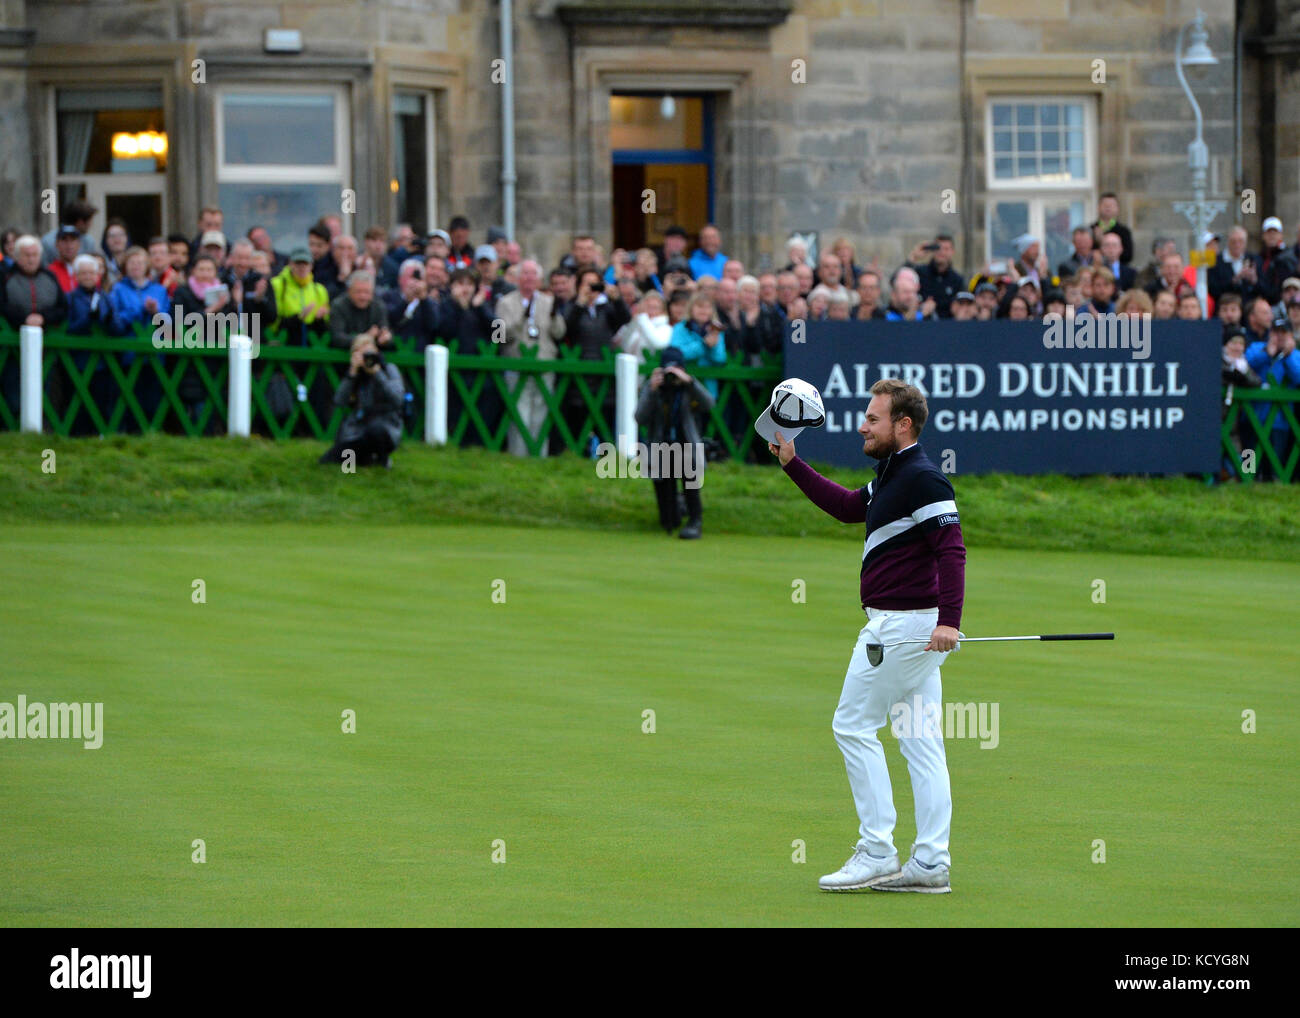 England's Tyrrell Hatton reacts after winning the Alfred Dunhill Links Championship atSt Andrews Old Course, Fife. Stock Photo